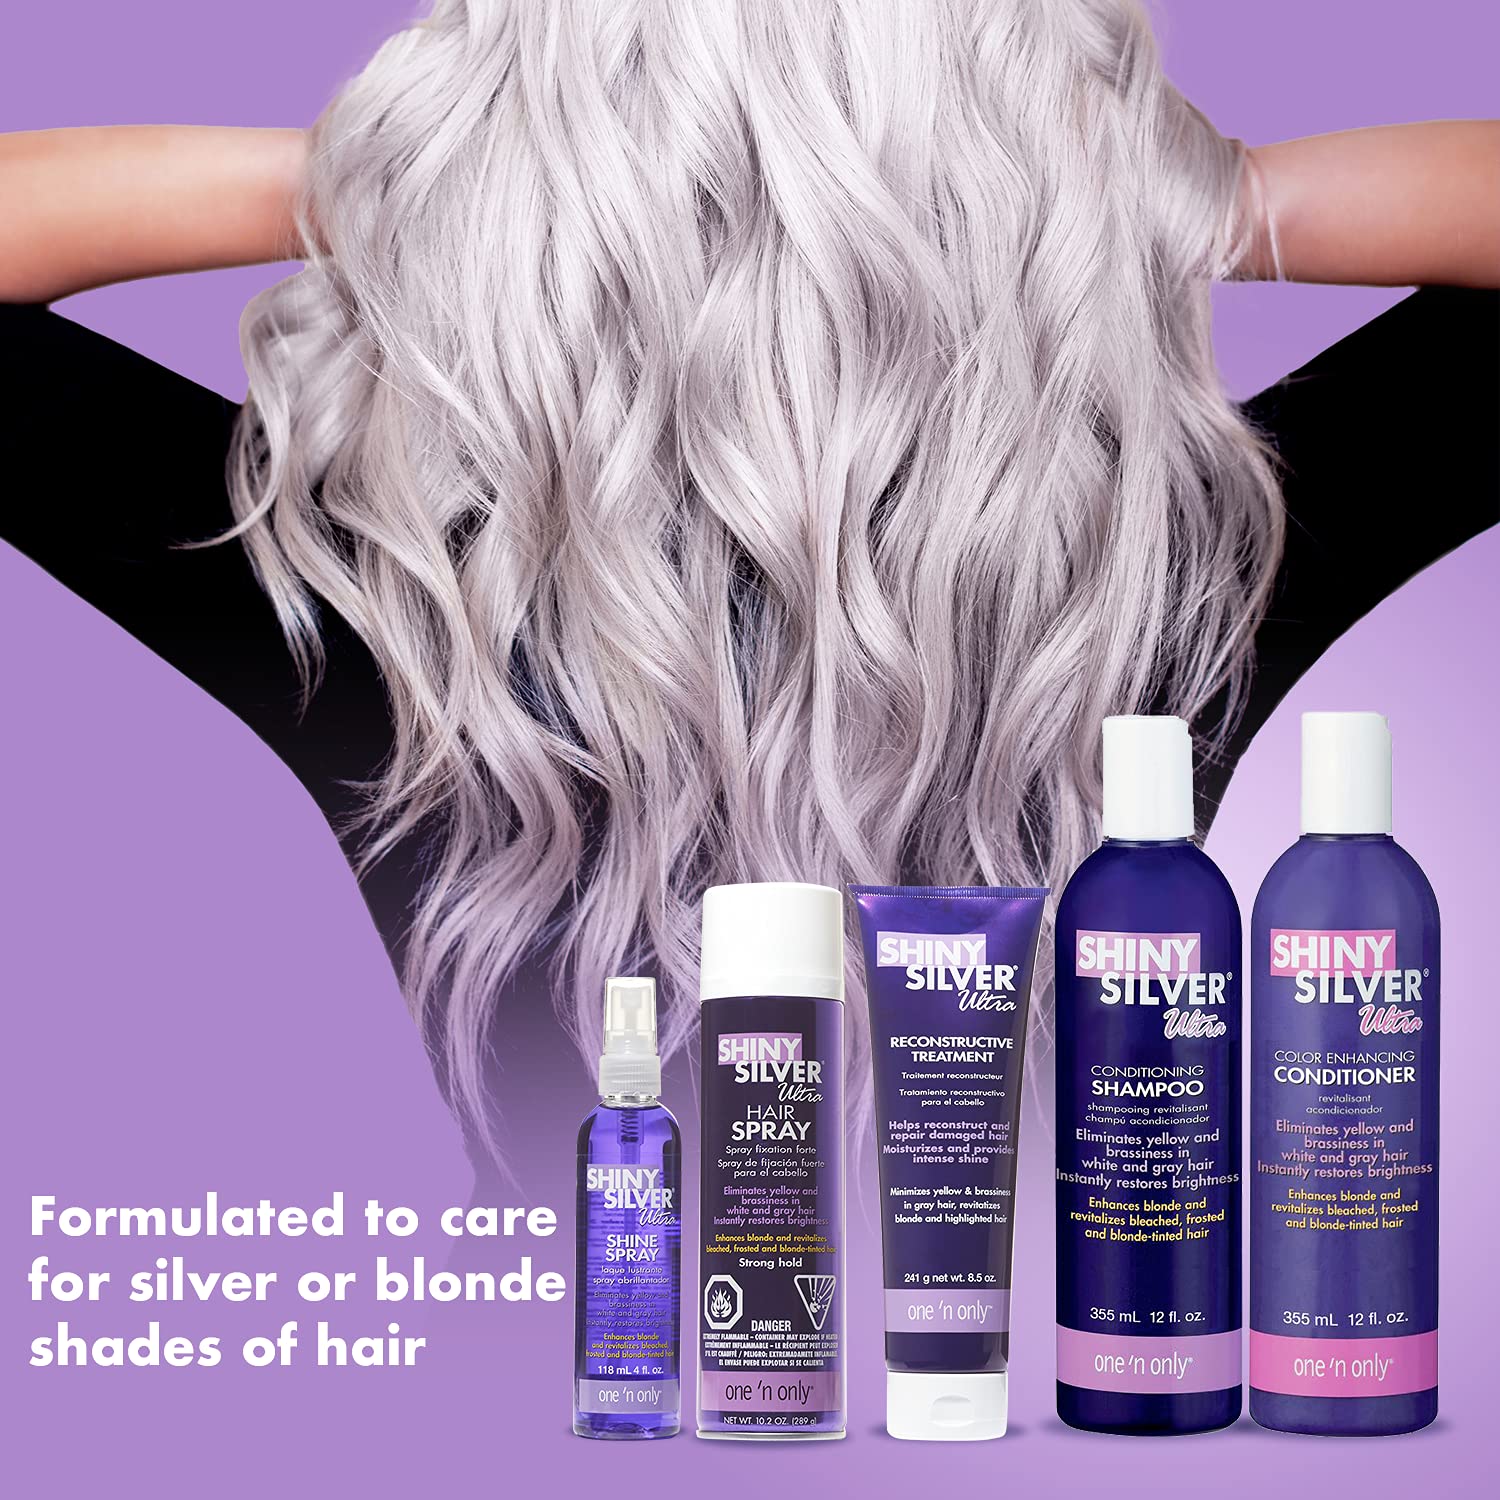 One 'n Only Shiny Silver Ultra Conditioning Shampoo, 1 Liter Find Your New Look Today!